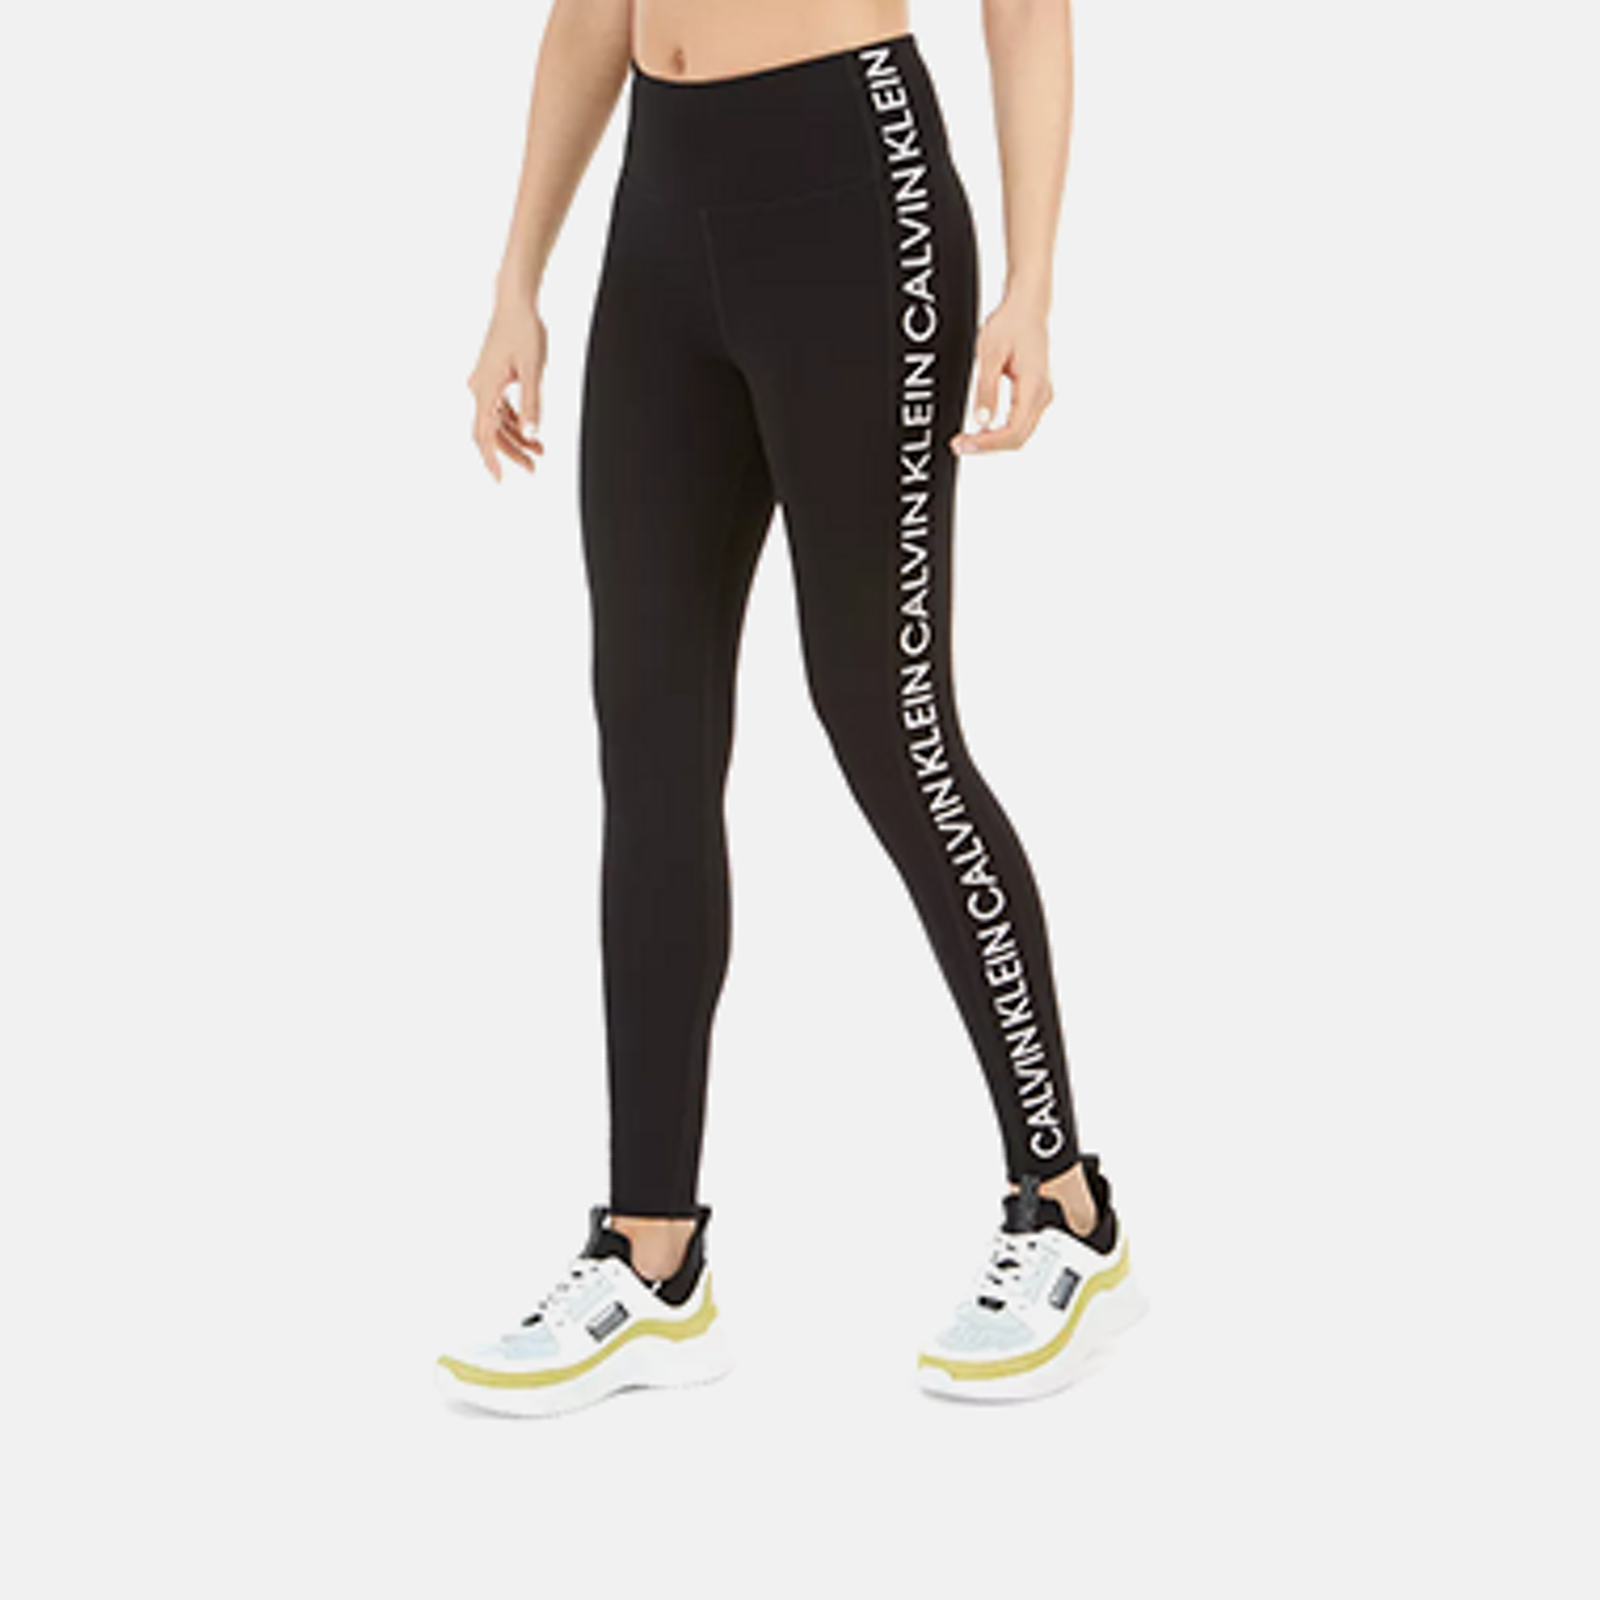 Cotton Workout Clothing & Activewear for Women - Macy's